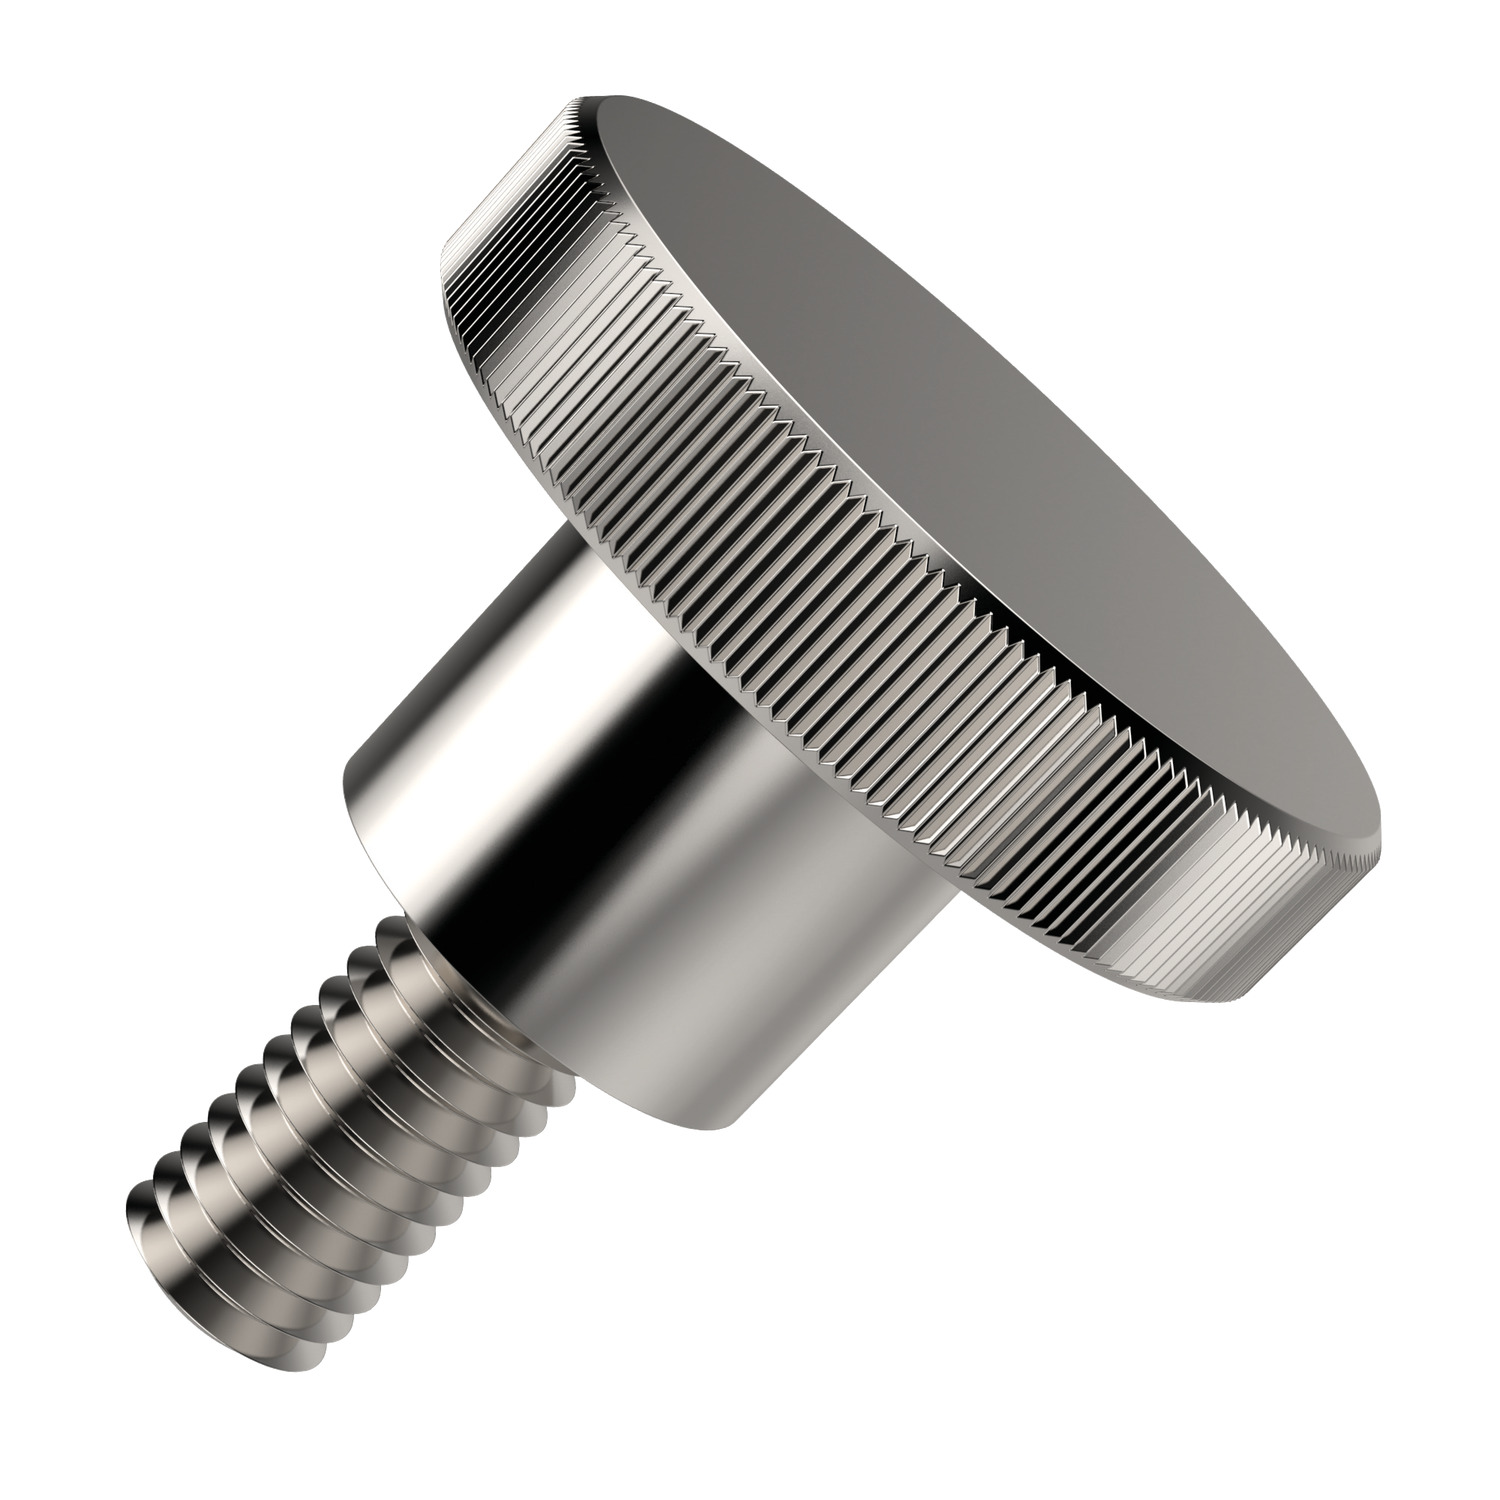 Knurled Thumb Screws This thumb screw comes with a shoulder and is manufactured to DIN 464 specification.